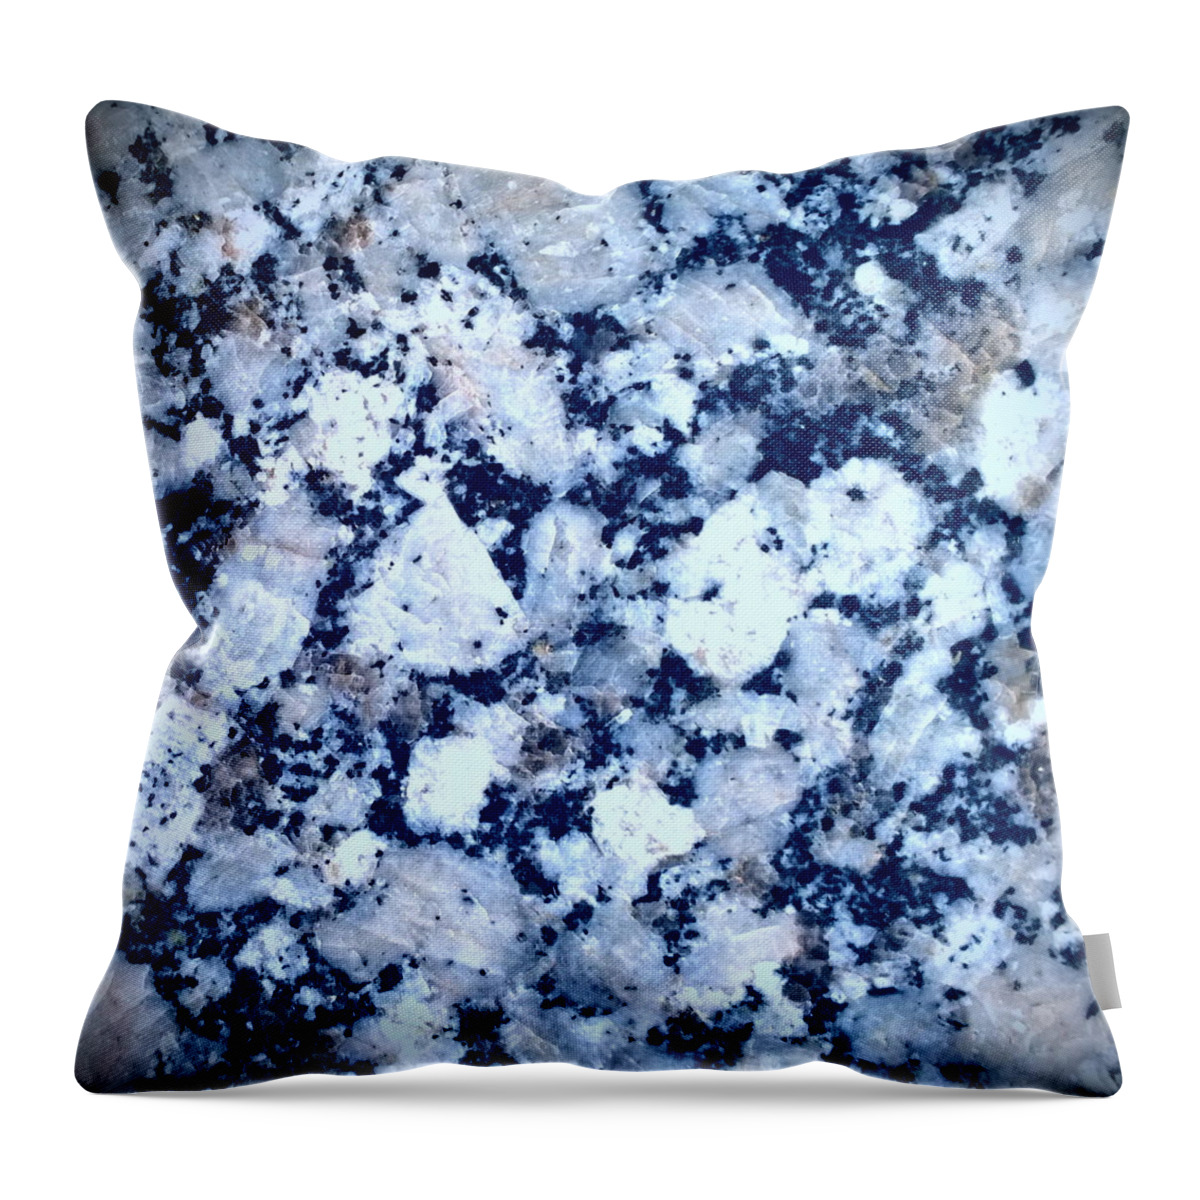 Photograph Throw Pillow featuring the photograph Blue Polished Granite by Delynn by Delynn Addams